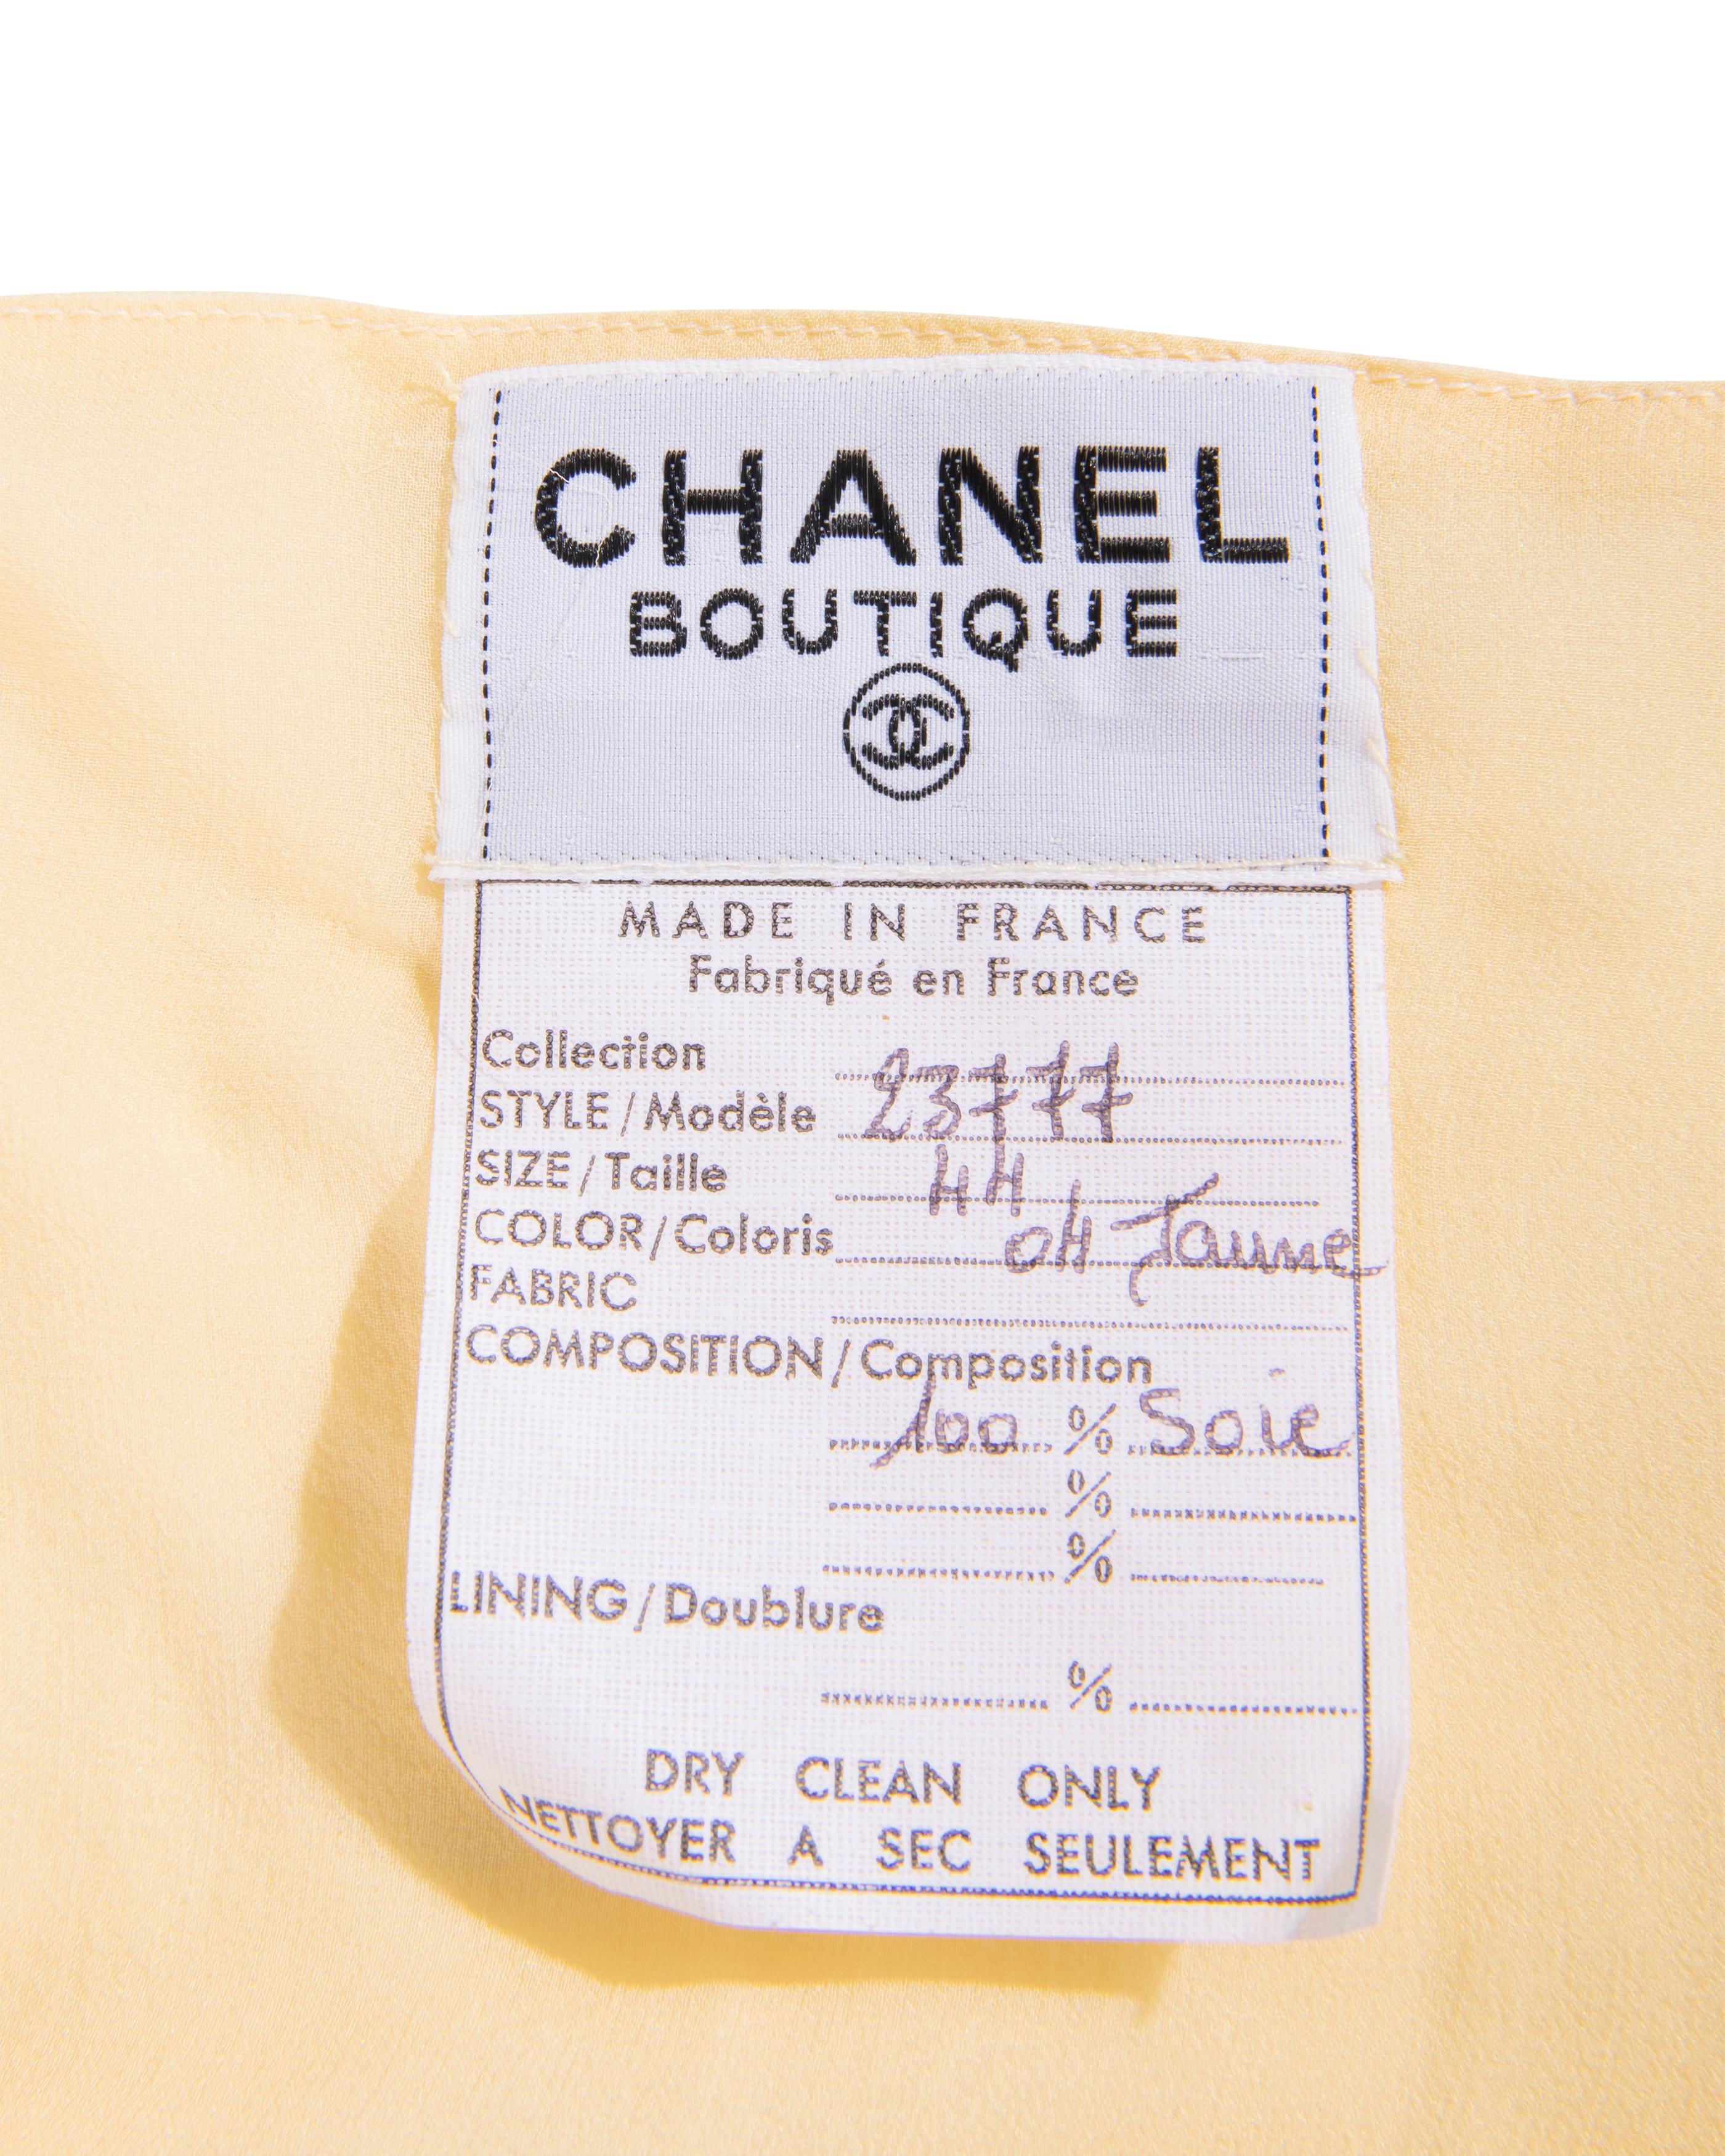 S/S 1984 Chanel by Karl Lagerfeld Butter Yellow Silk Chiffon Gown 6